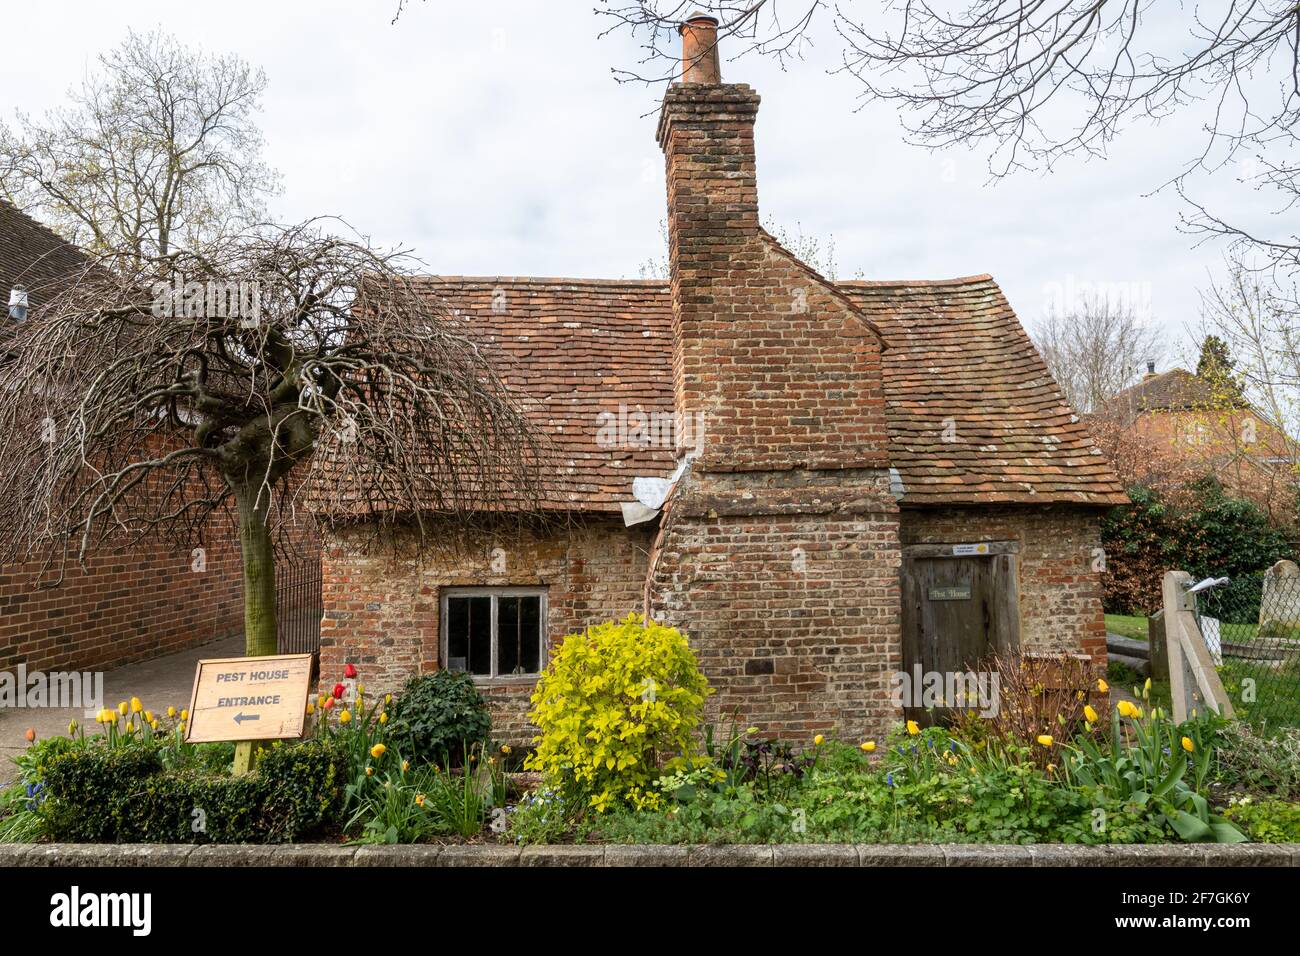 The Odiham Pest House, which dates from the early 1620s, Hampshire, UK. Used to quarantine people with infectious diseases. Stock Photo